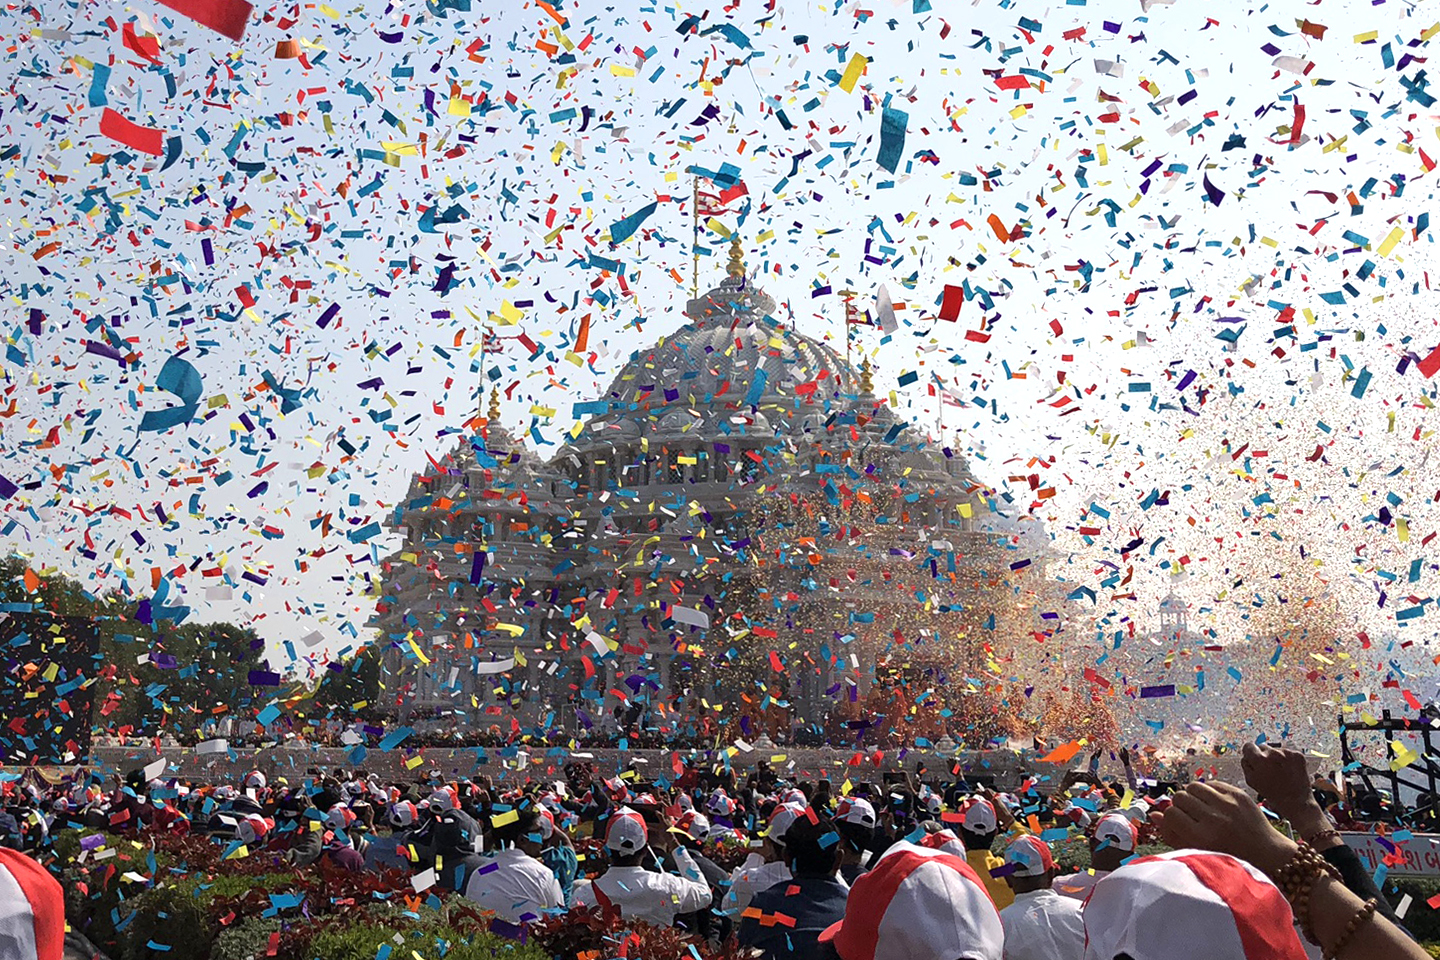 Large crowd faces a temple. Confetti is scattered across the scene.